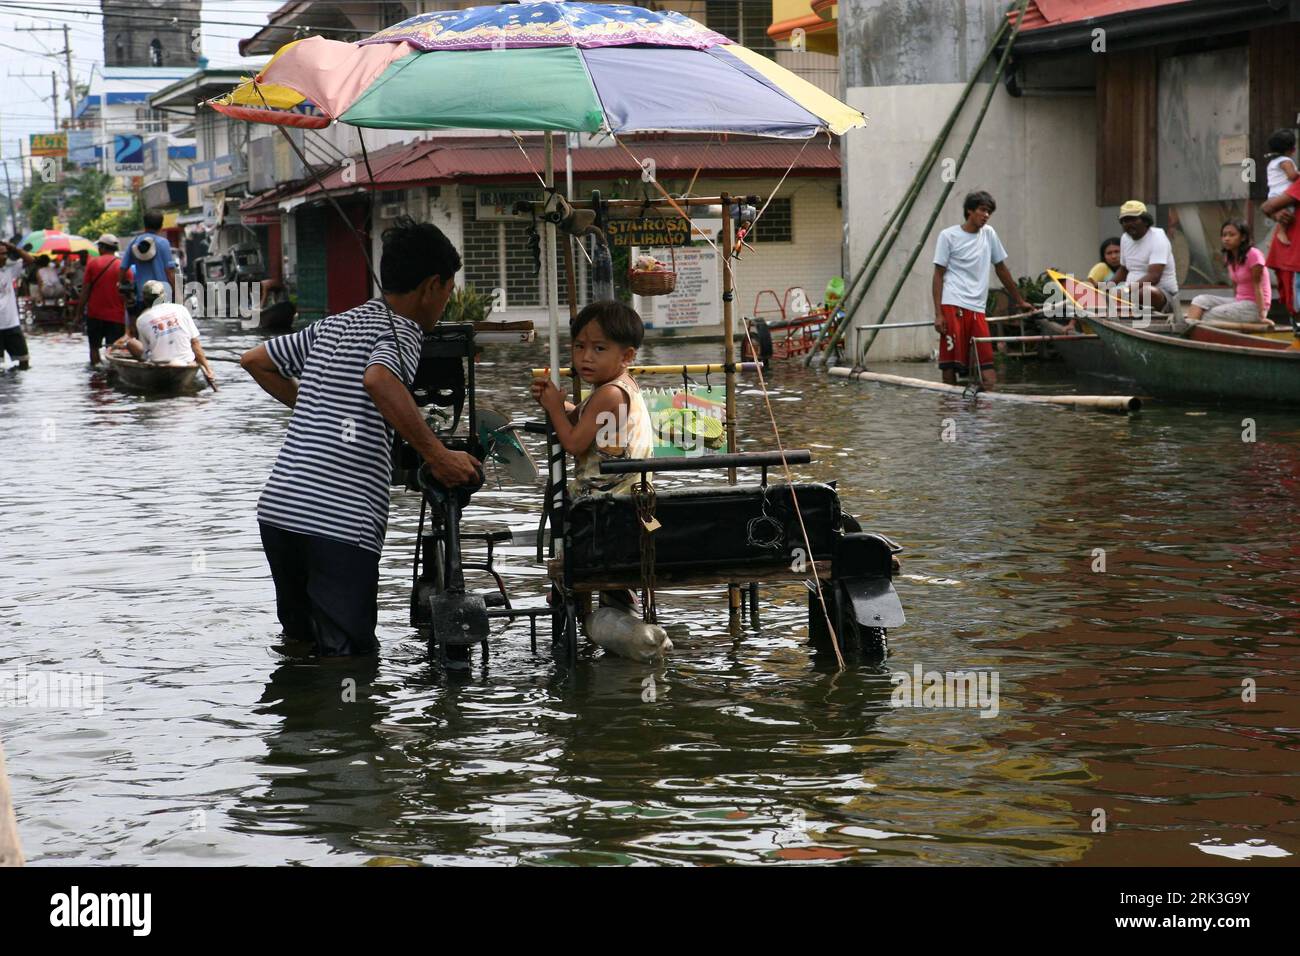 Bildnummer: 53506500  Datum: 05.10.2009  Copyright: imago/Xinhua (091005) -- MANILA, Oct. 5, 2009 (Xinhua) -- Filipinos walk in floodwaters in Santa Cruz town, south of Manila, capital of the Philippines, on Oct. 5, 2009. At least 16were killed, mostly buried in landslides, as Typhoon Parma swept through the Philippines northern coast since Oct. 3, leaving trees uprooted, power pylons toppled and houses damaged. (Xinhua/Sybhel Cordero) (lr) (6)THE PHILIPPINES-TYPHOON PARMA-AFTERMATH PUBLICATIONxNOTxINxCHN Philippinen Taifun Parma Naturtatastophen Flut Überschwemmung kbdig xub 2009 quer premium Stock Photo